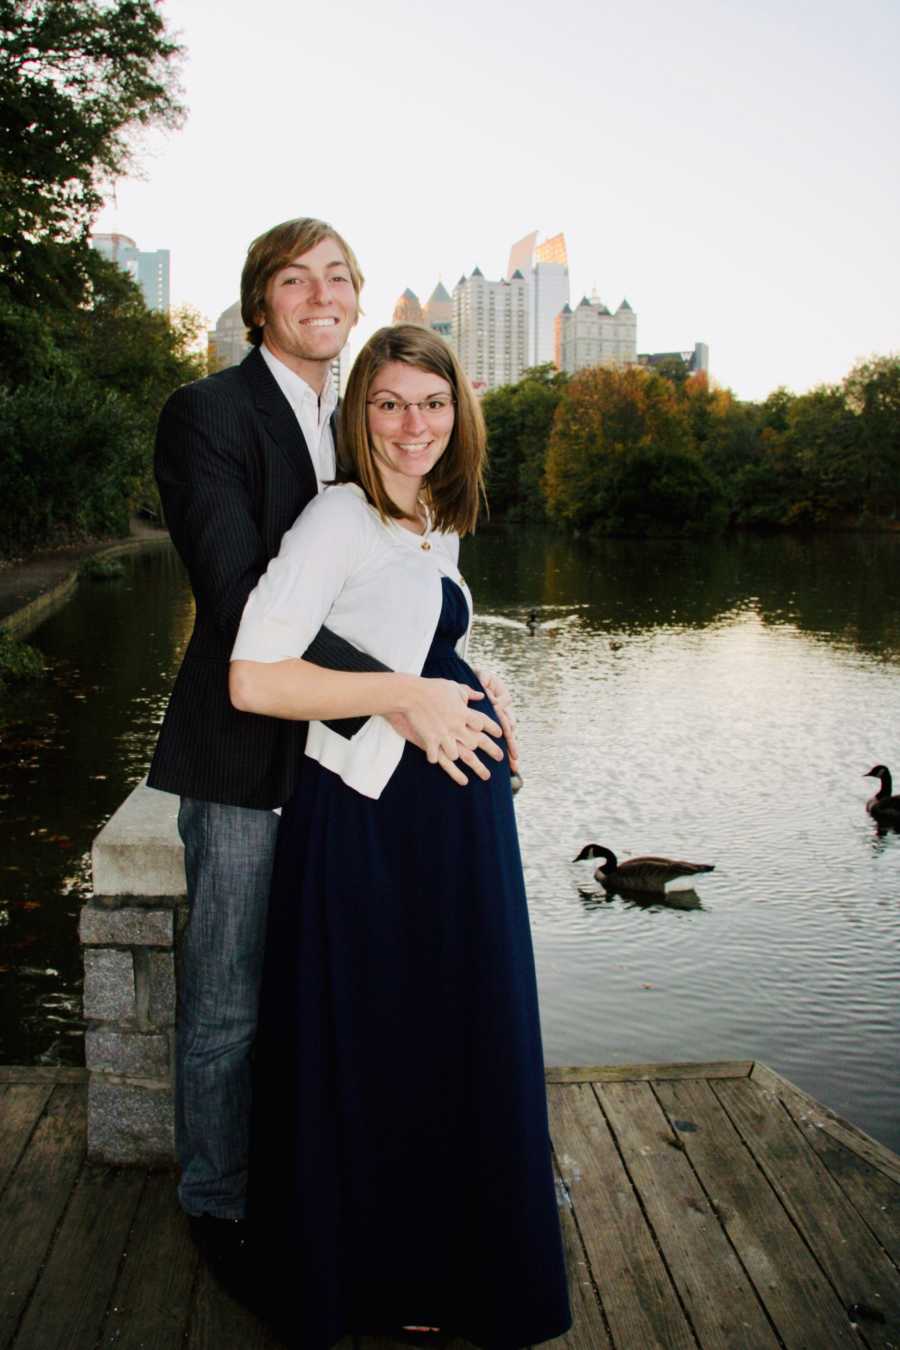 Husband stands behind holding pregnant wife on dock with city skyline in background